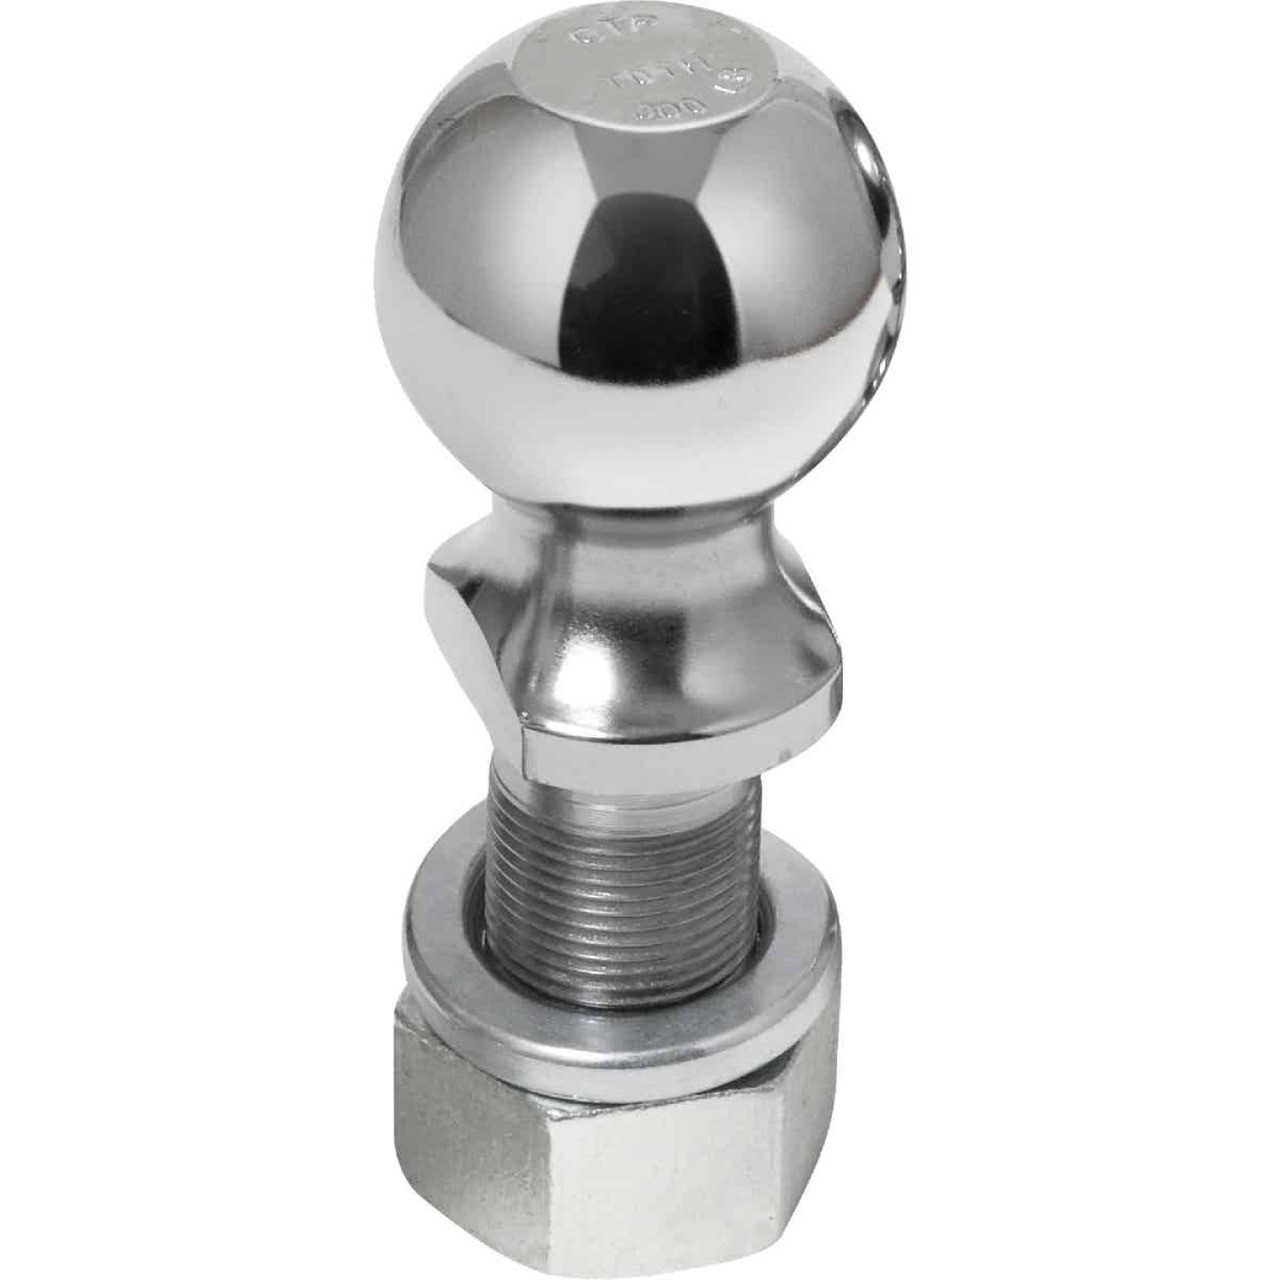 Reese Towpower Class IV Hitch Ball, 2 In. x 1-1/4 In. x 2-3/4 In.